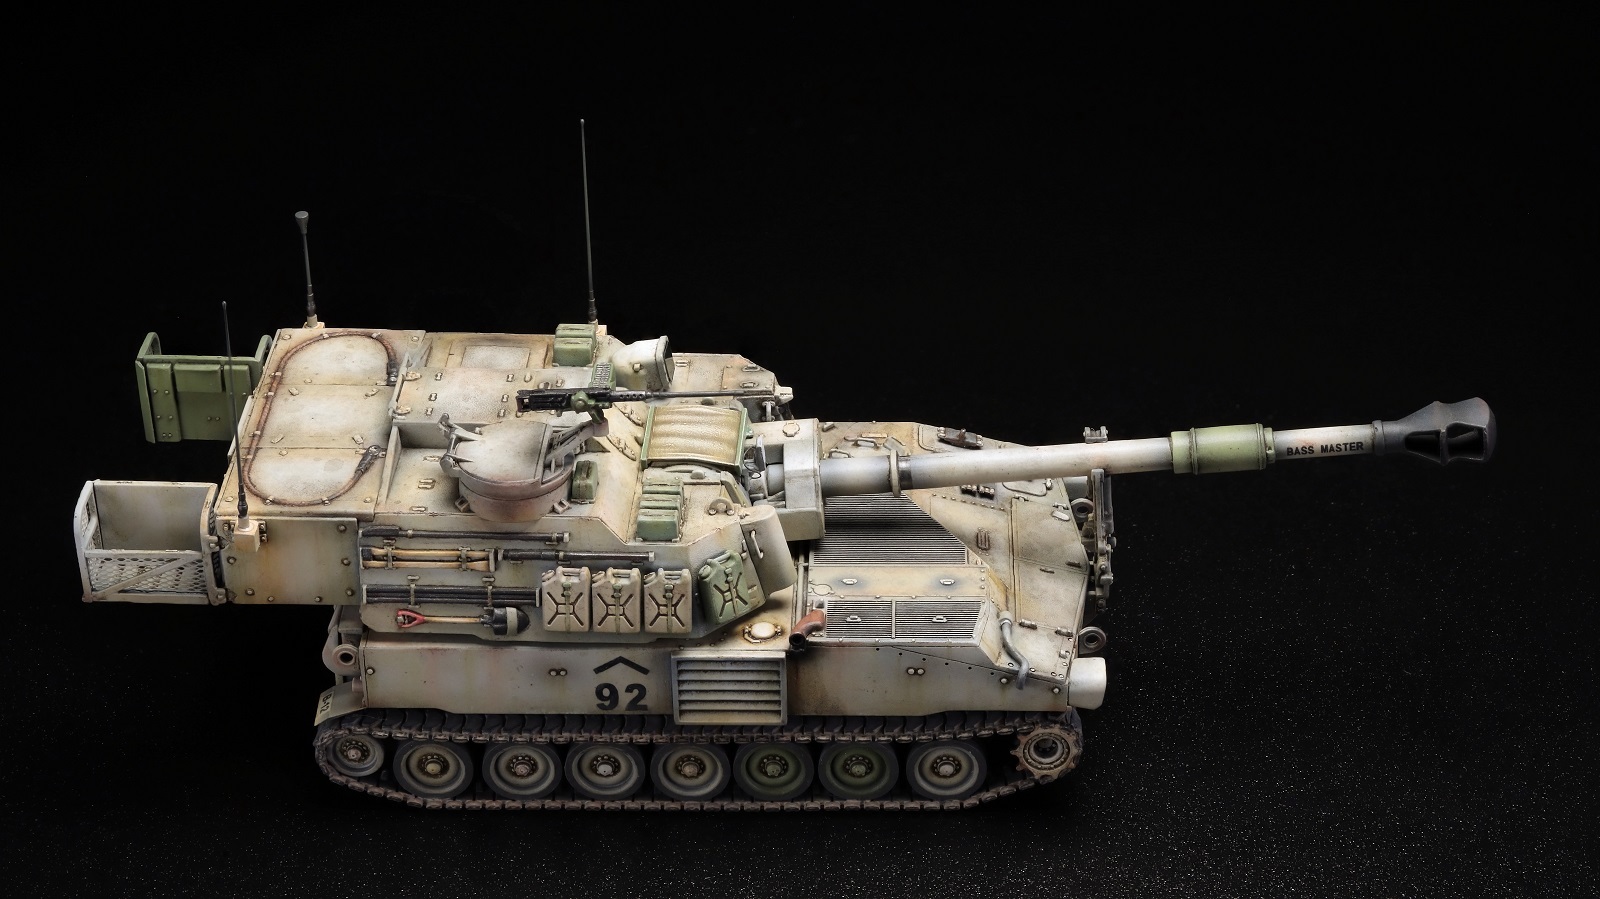 Riich 1/72 RT72001 M109A6 Paladin 155 mm SELF-PROPELLED HOWITZER 